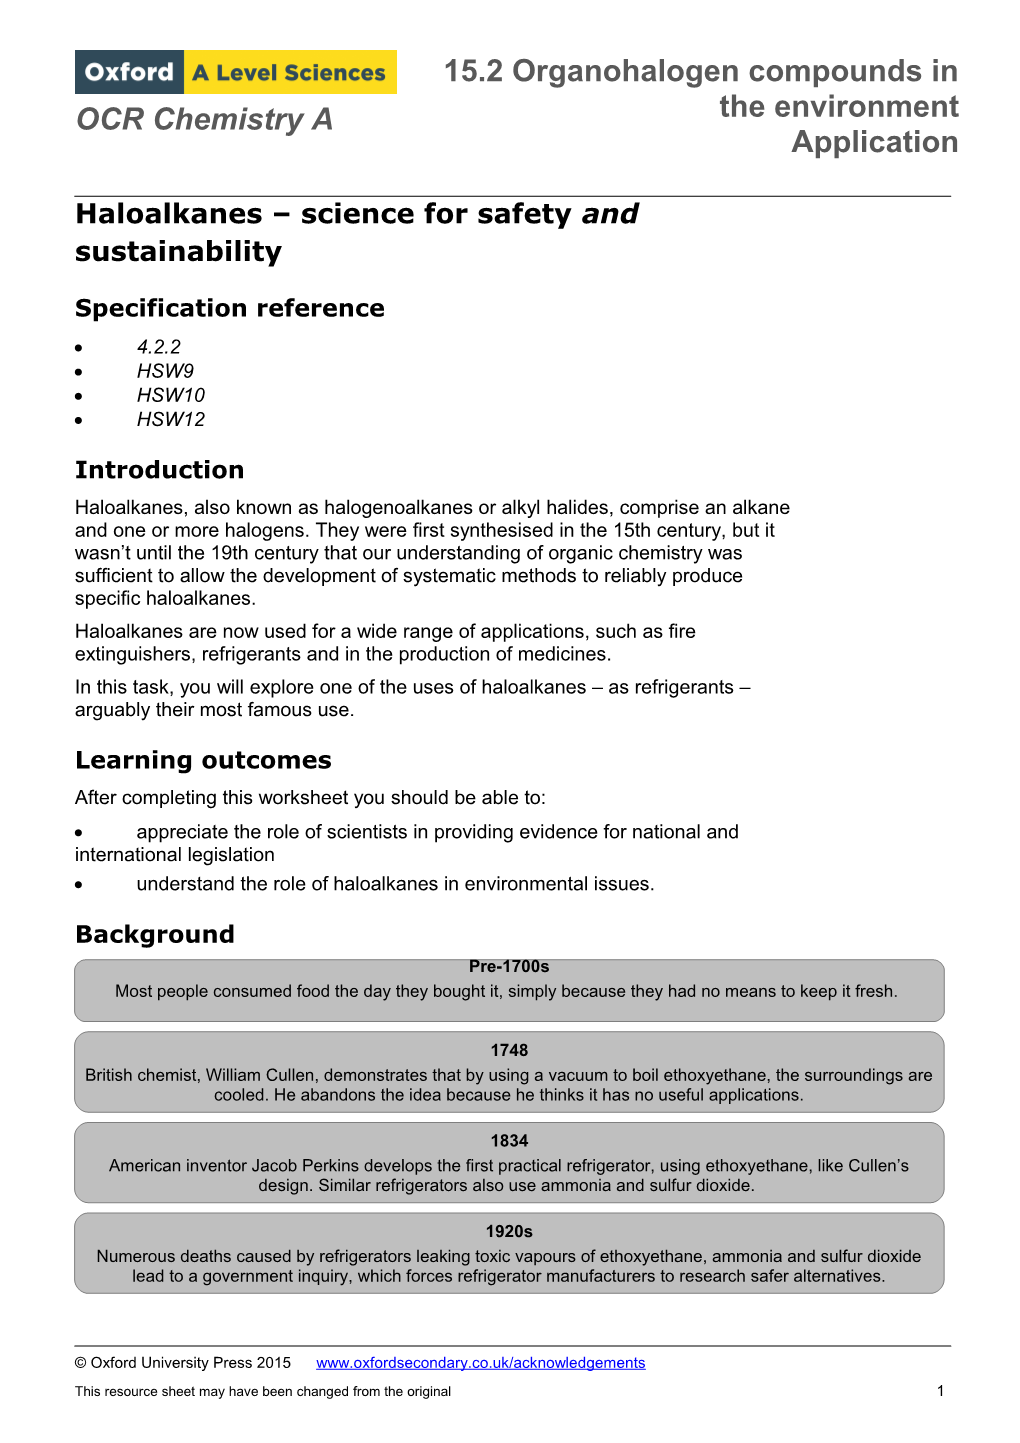 Haloalkanes Science for Safety and Sustainability